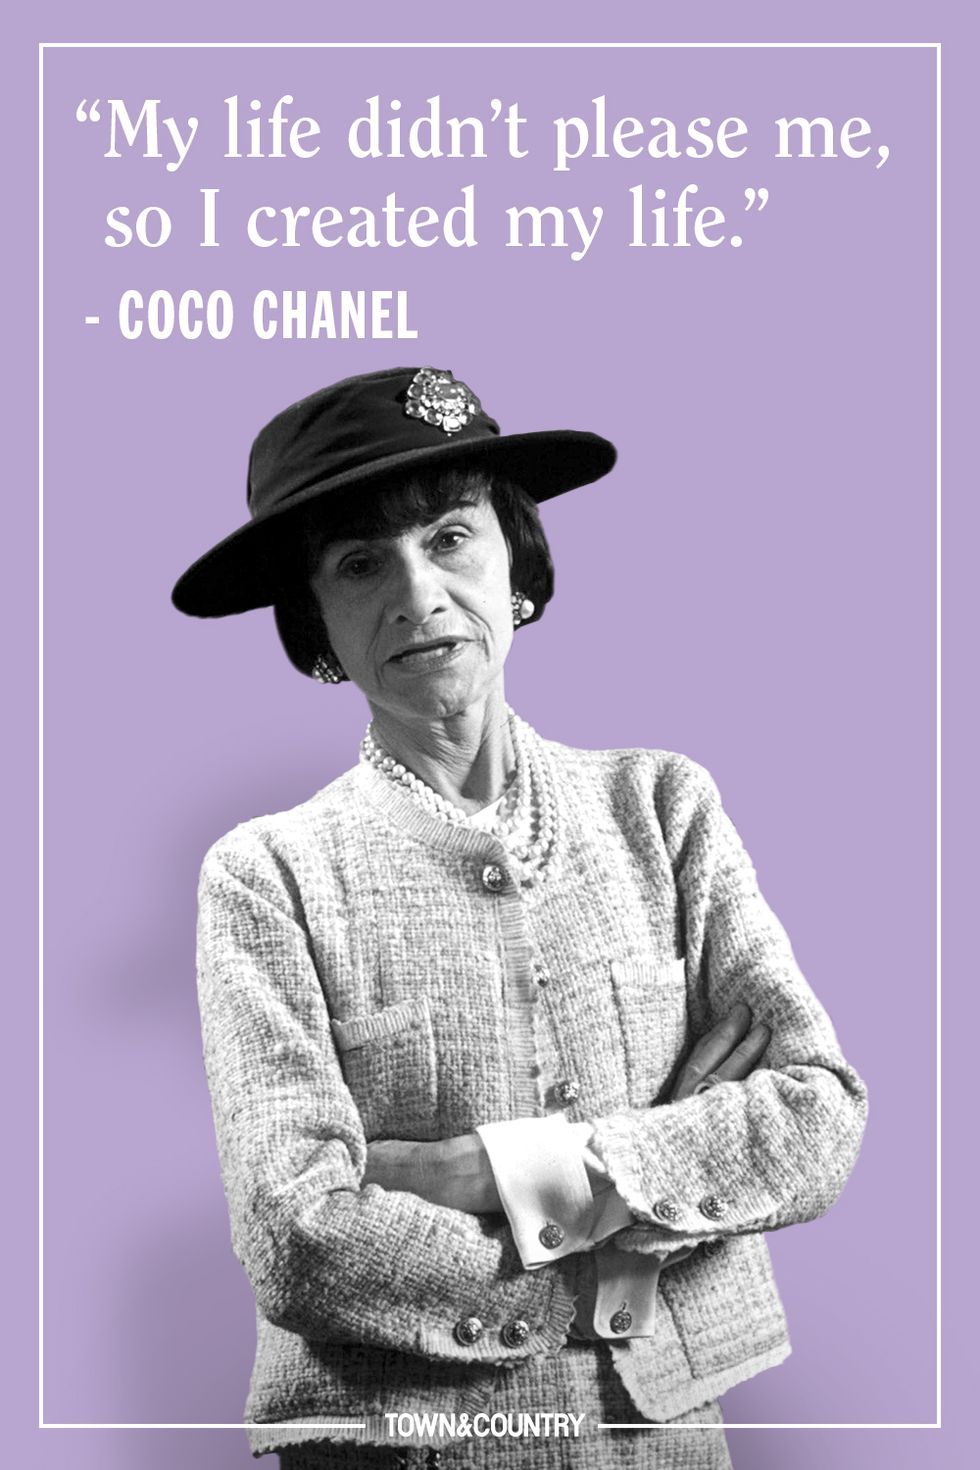 coco chanel chambers dictionary of great quotations